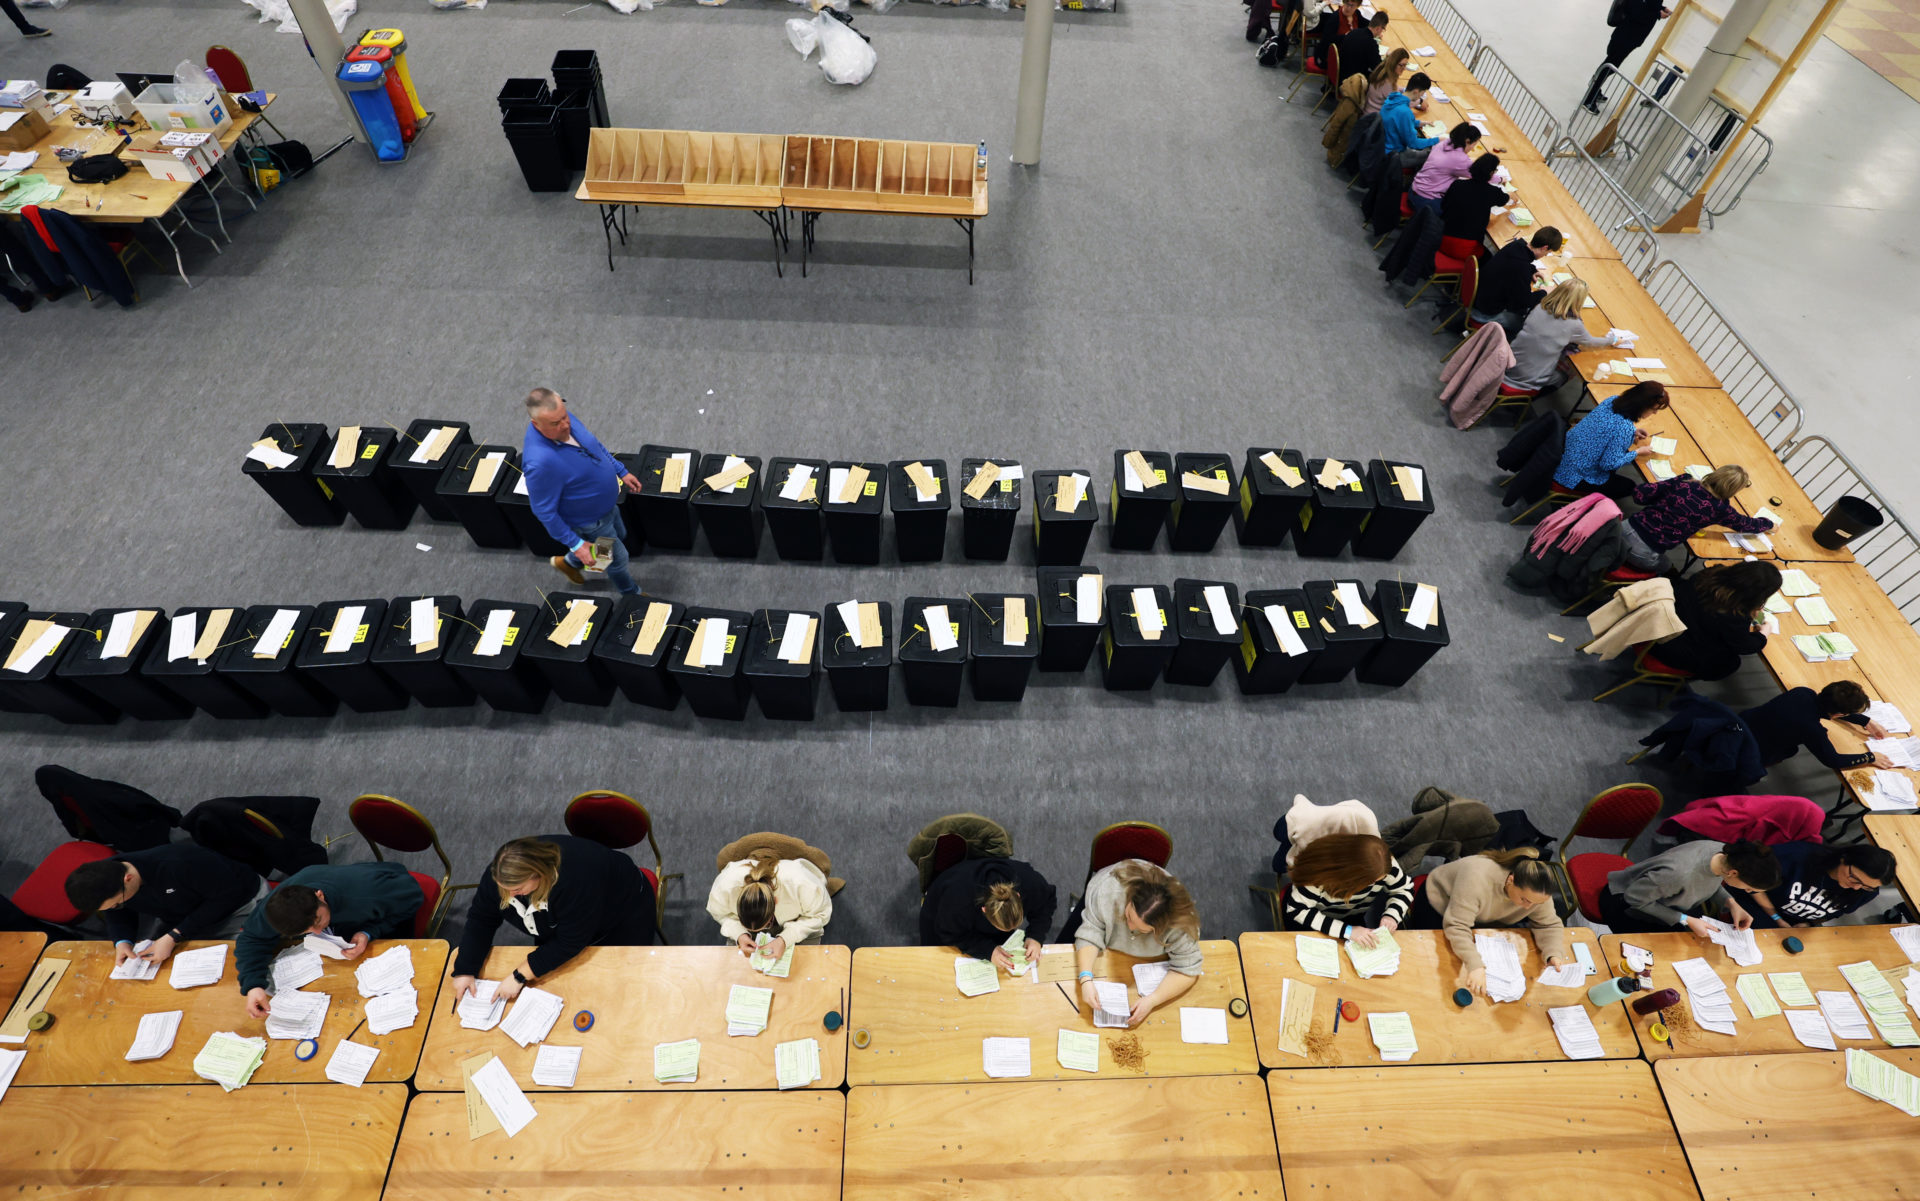 Counting in the Family and Care Referendums at Dublin's RDS, 9-3-24.